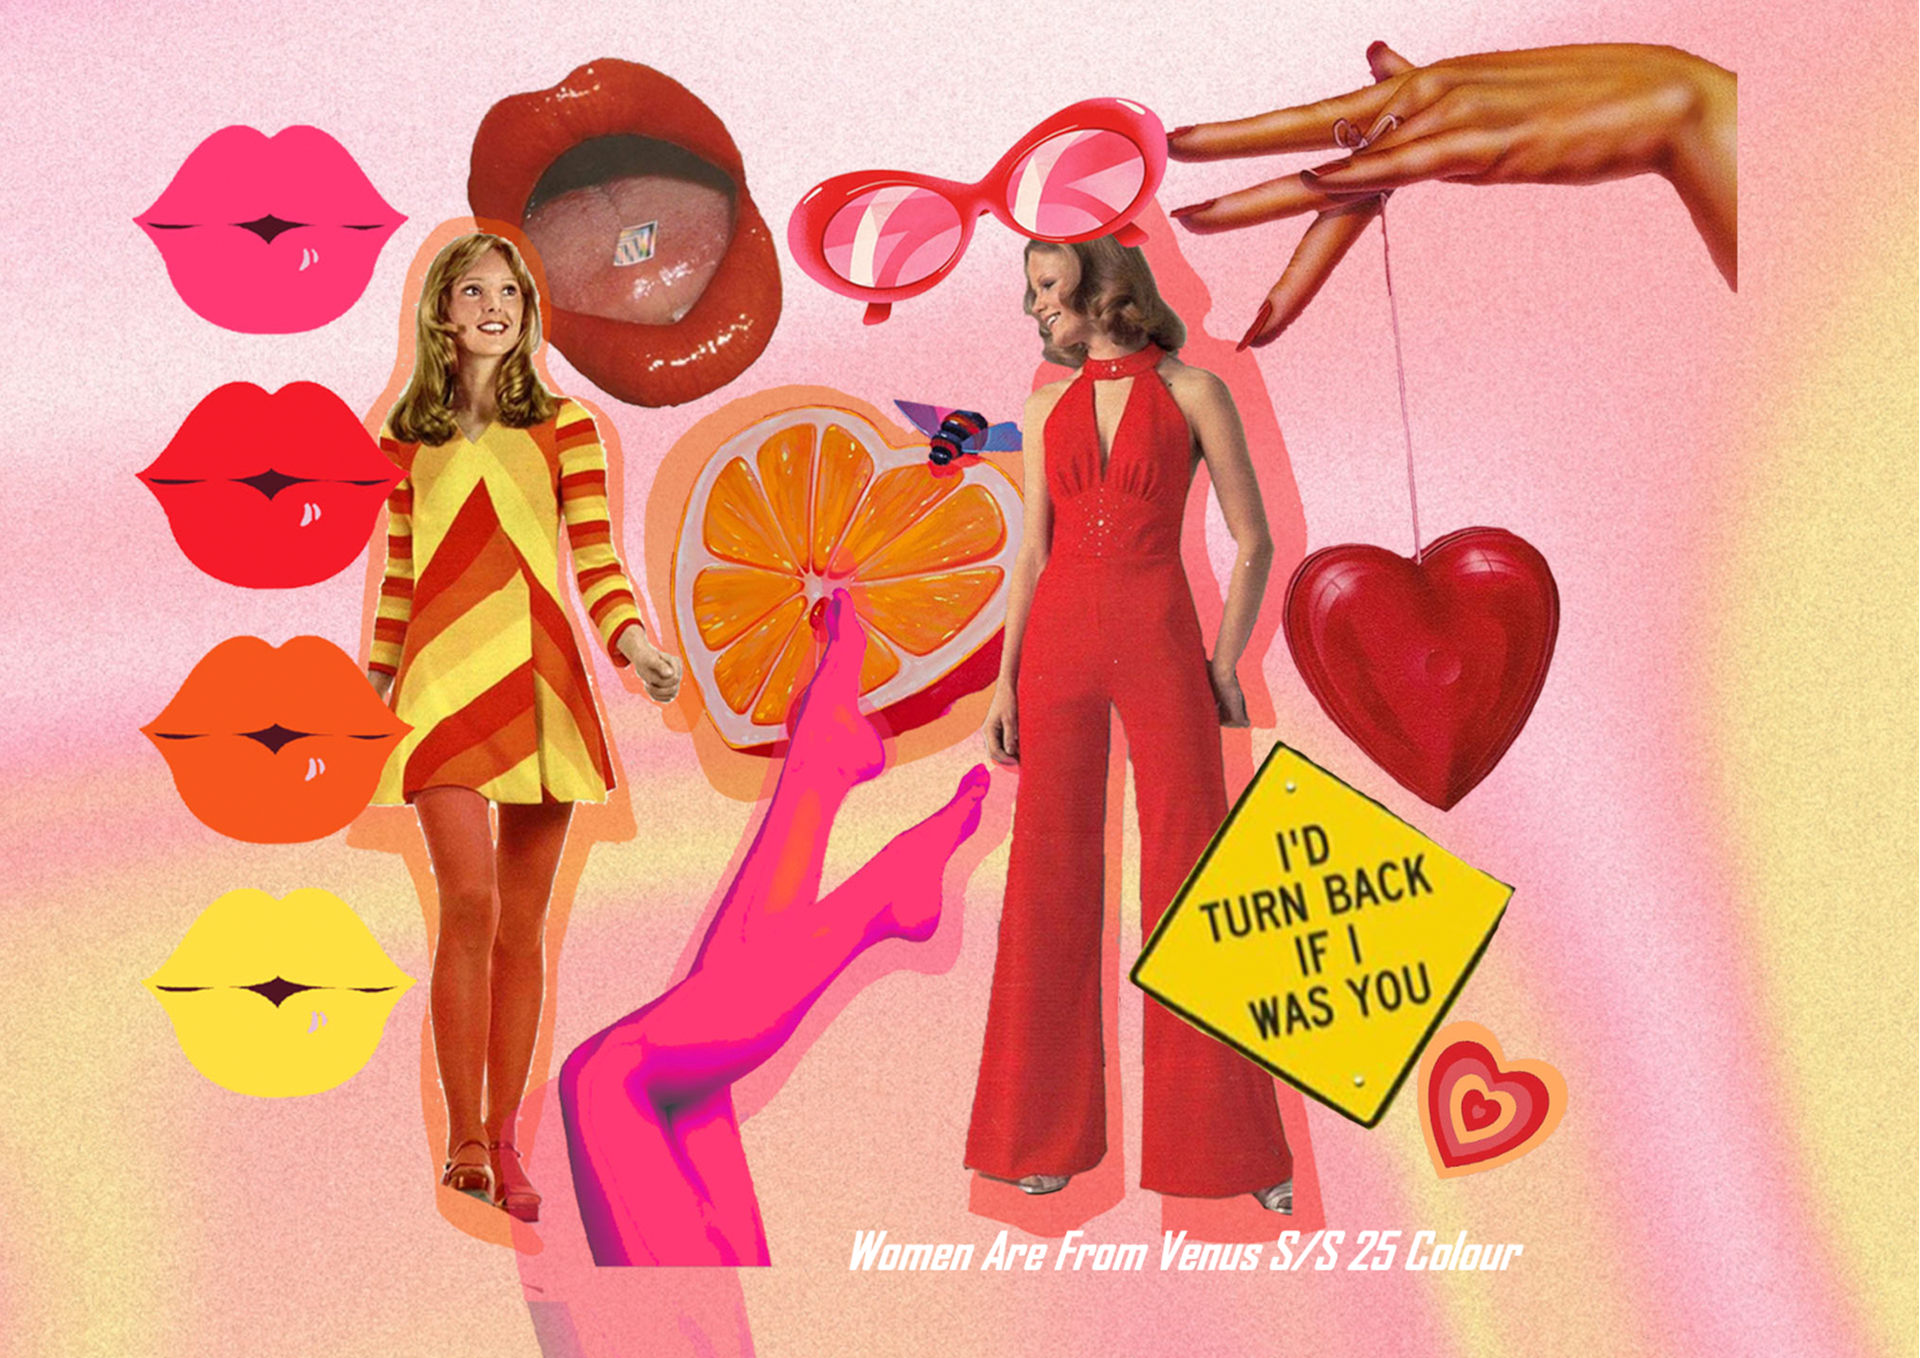 Images of two female models in 1960s-style outfits, surrounded by colourful lips and hearts